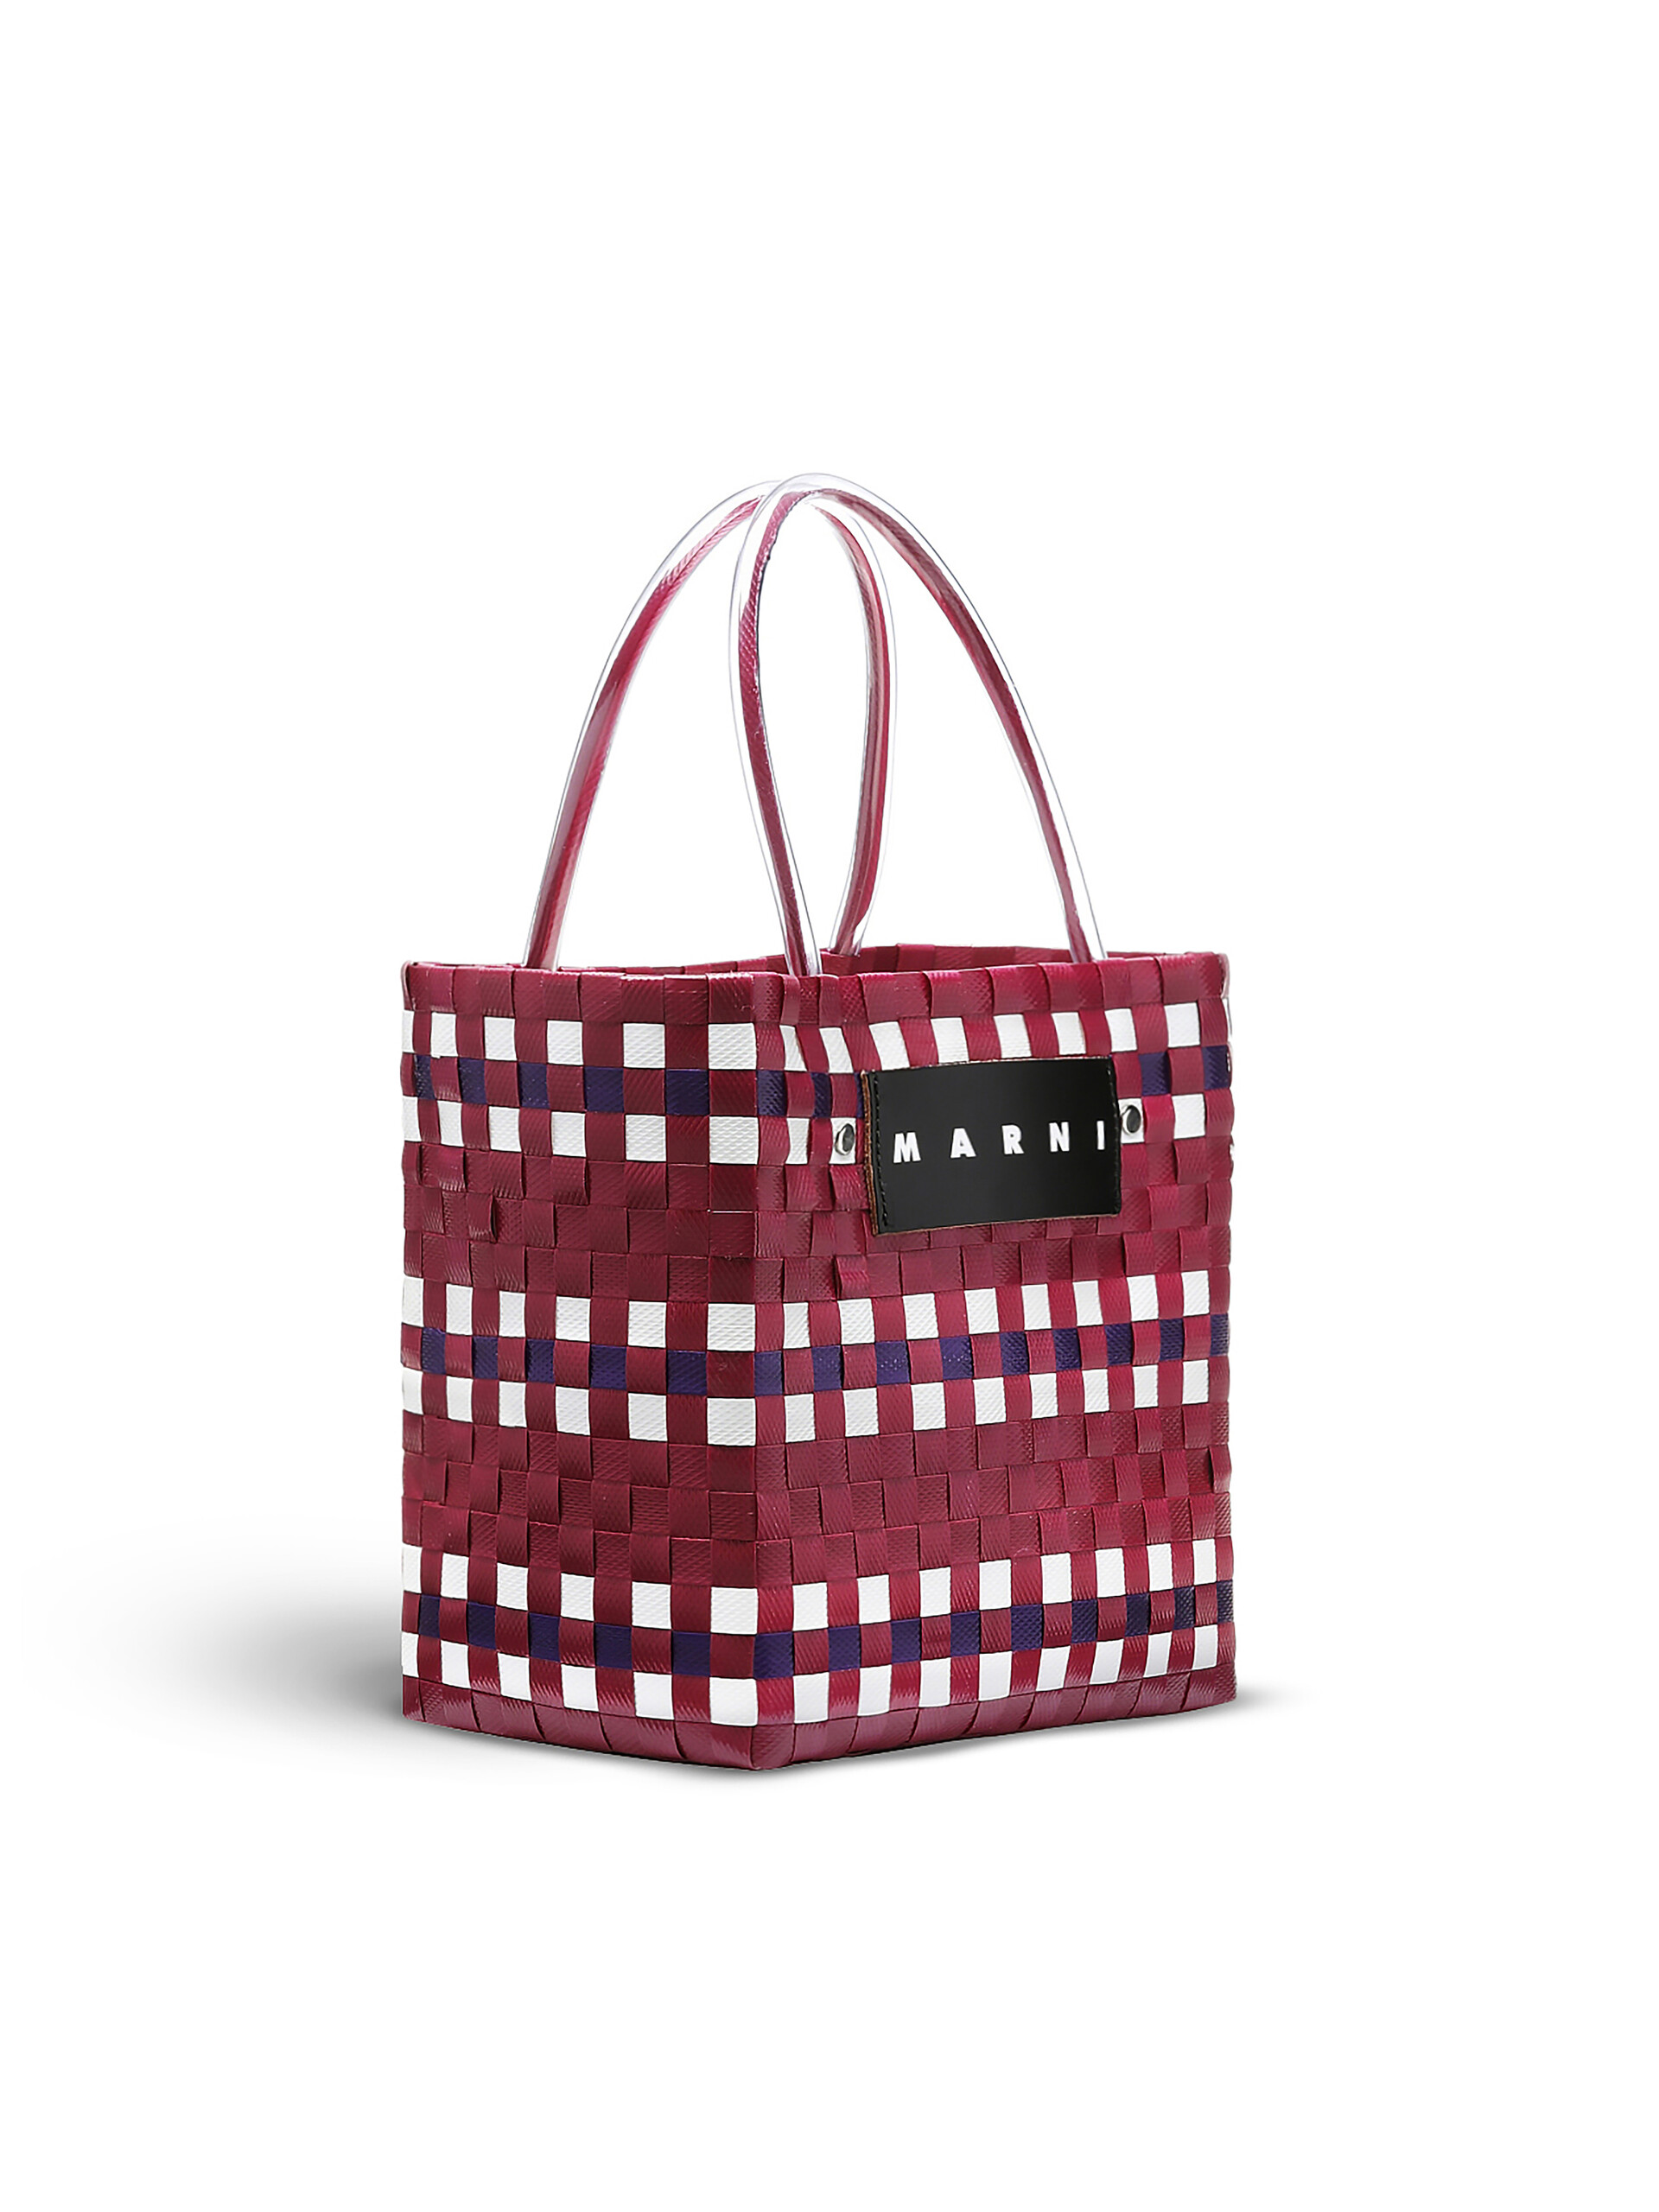 MARNI MARKET BASKET bag in pink woven material - Shopping Bags - Image 2